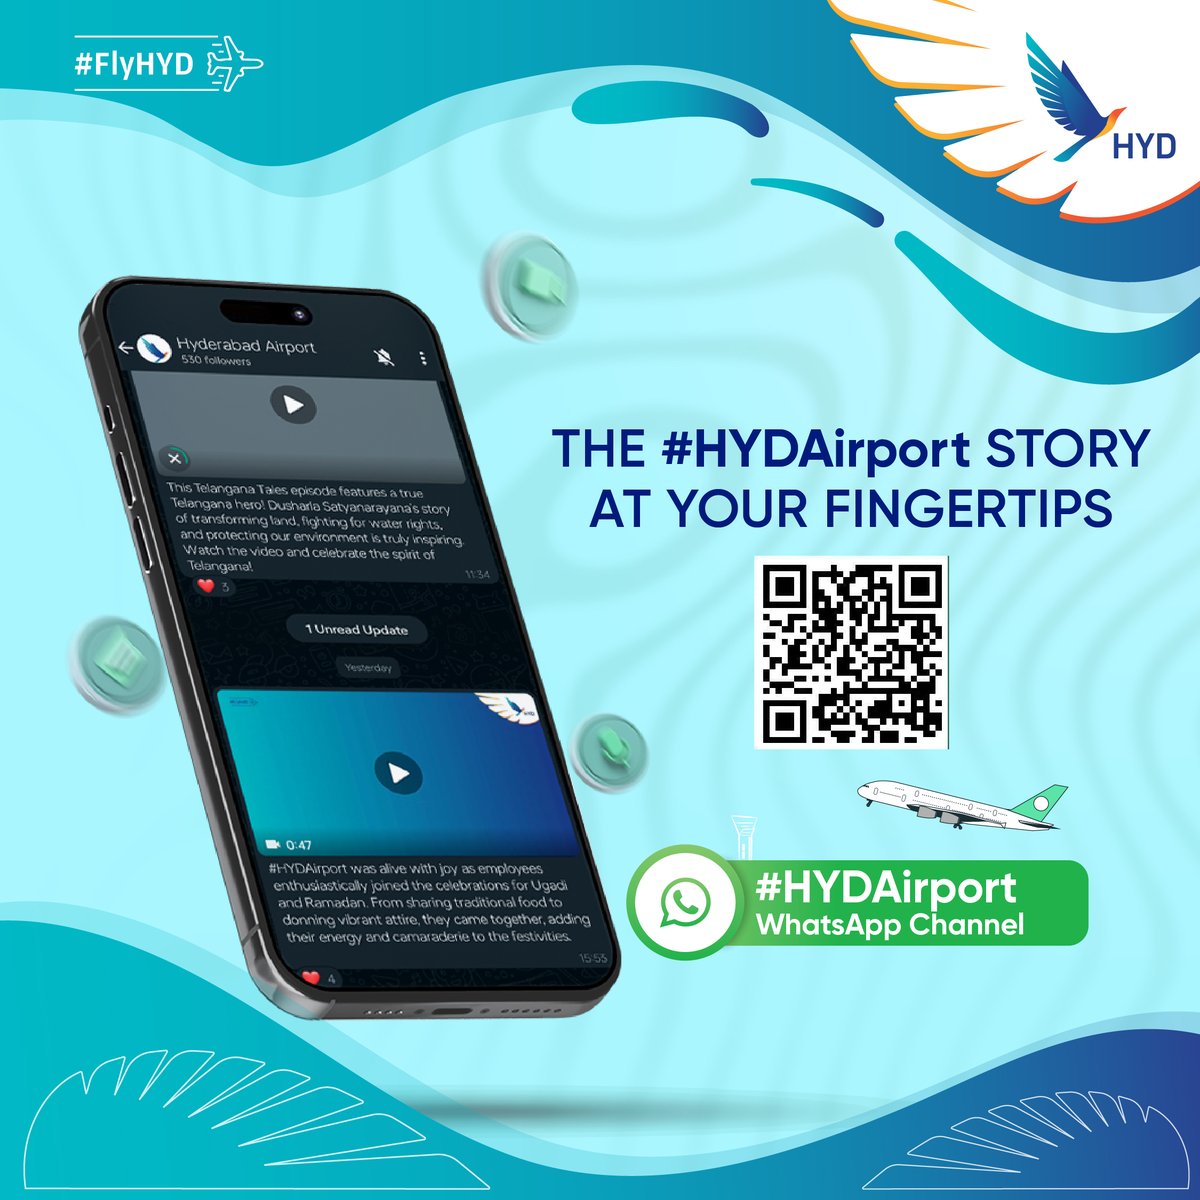 The #HYDAirport story at your fingertips! Join the official WhatsApp channel to know the what's what of #HYDAirport! #FlyHYD #ExperienceEpicEveryday #Updates #StayInformed @HiHyderabad @HyderabadTrails @Hyderabad1st @AAI_Official @MoCA_GoI @JM_Scindia @TelanganaCMO @ACIAPACMID